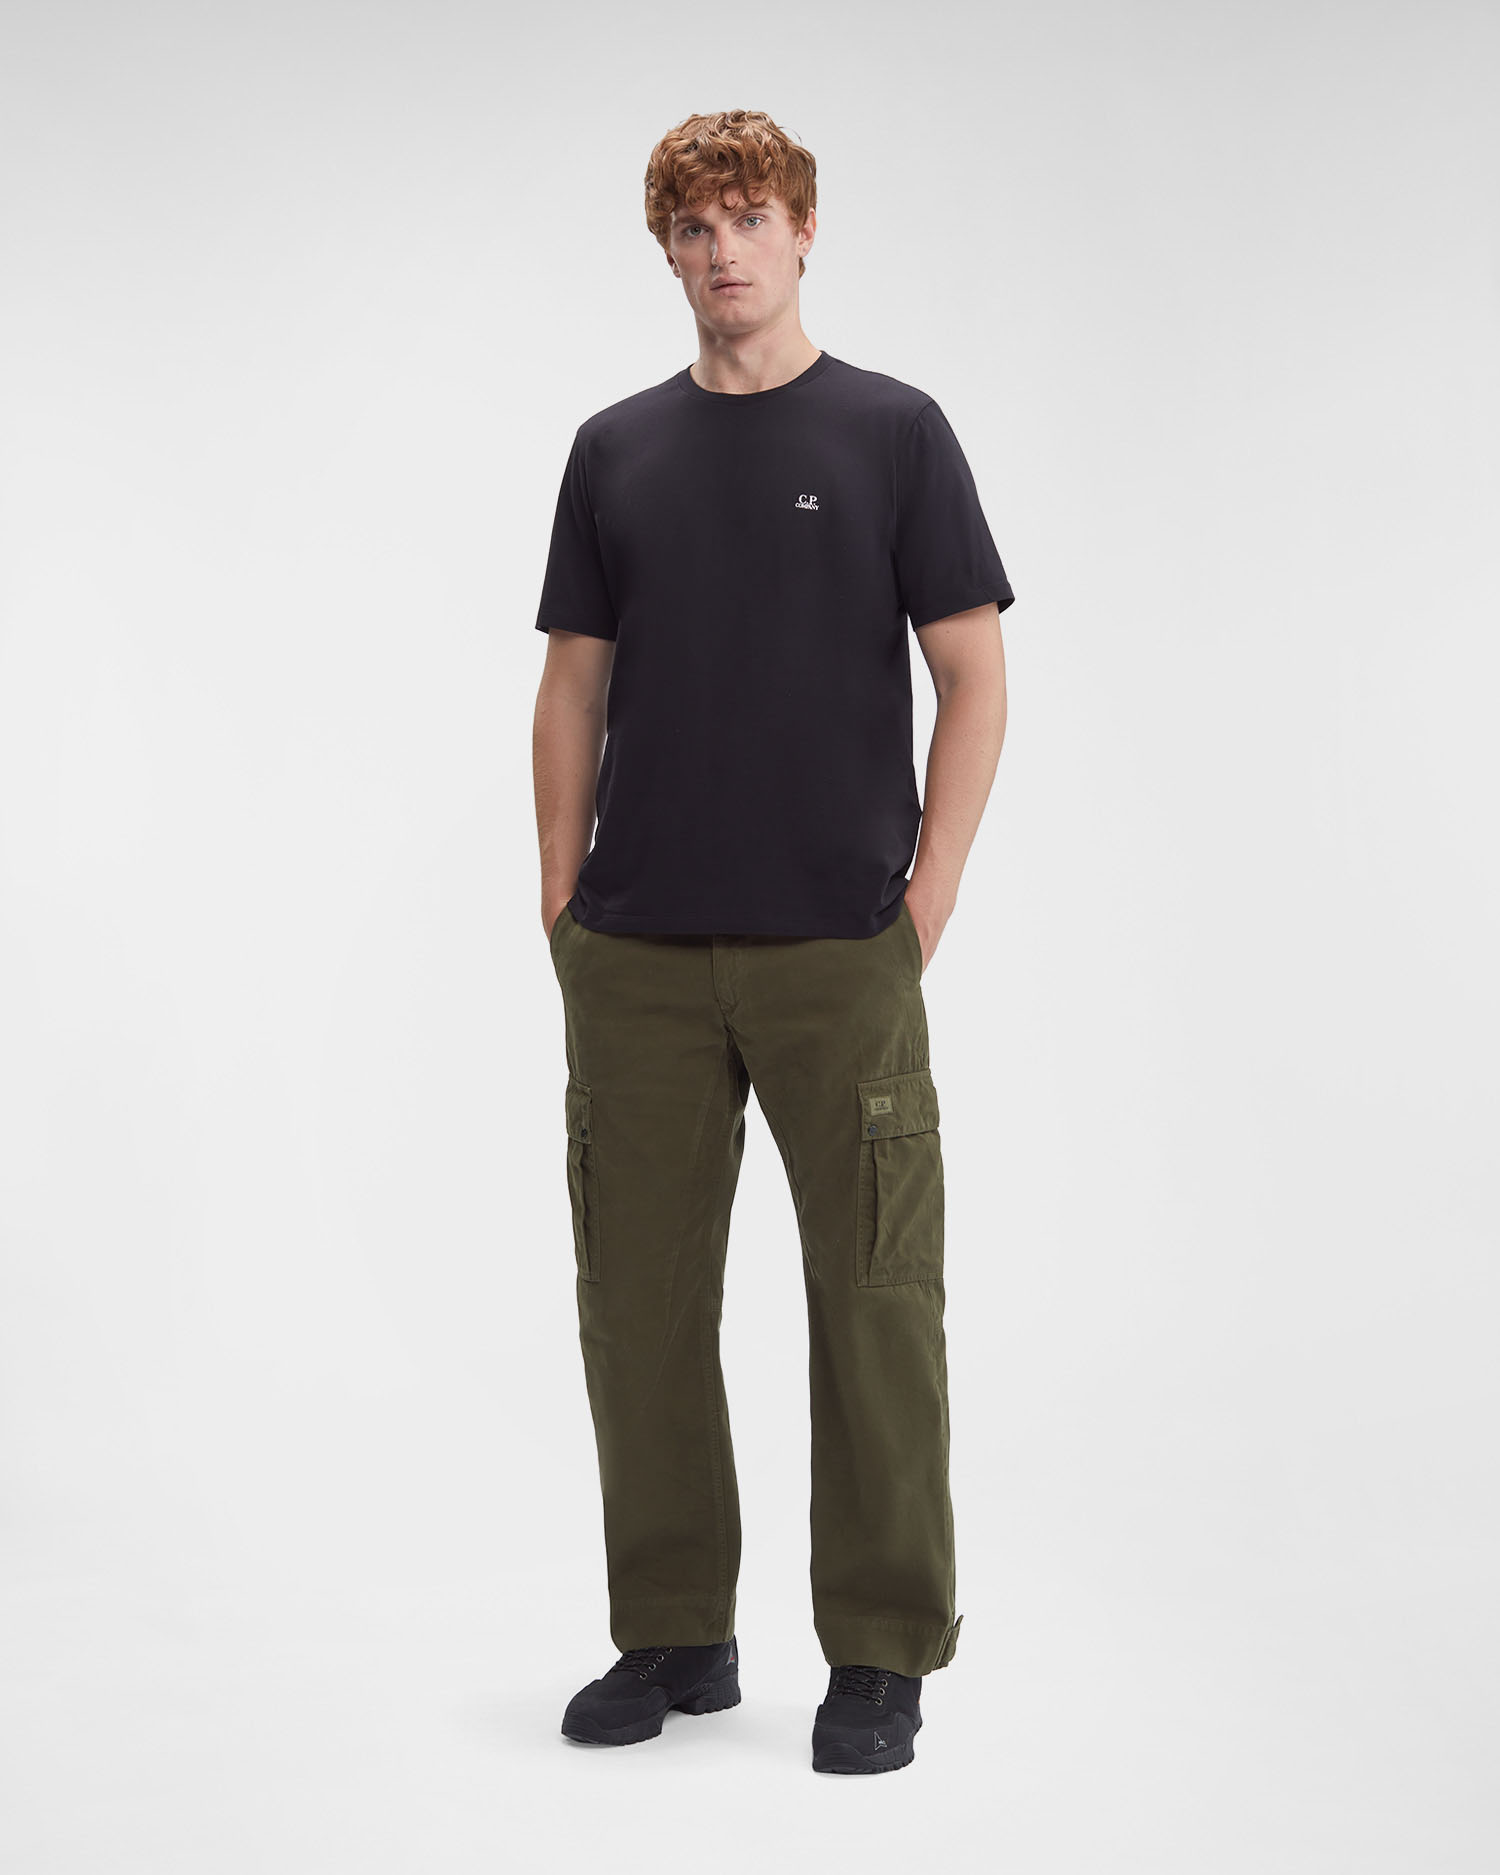 Military Twill Emerized Cargo Pants | C.P. Company Online Store